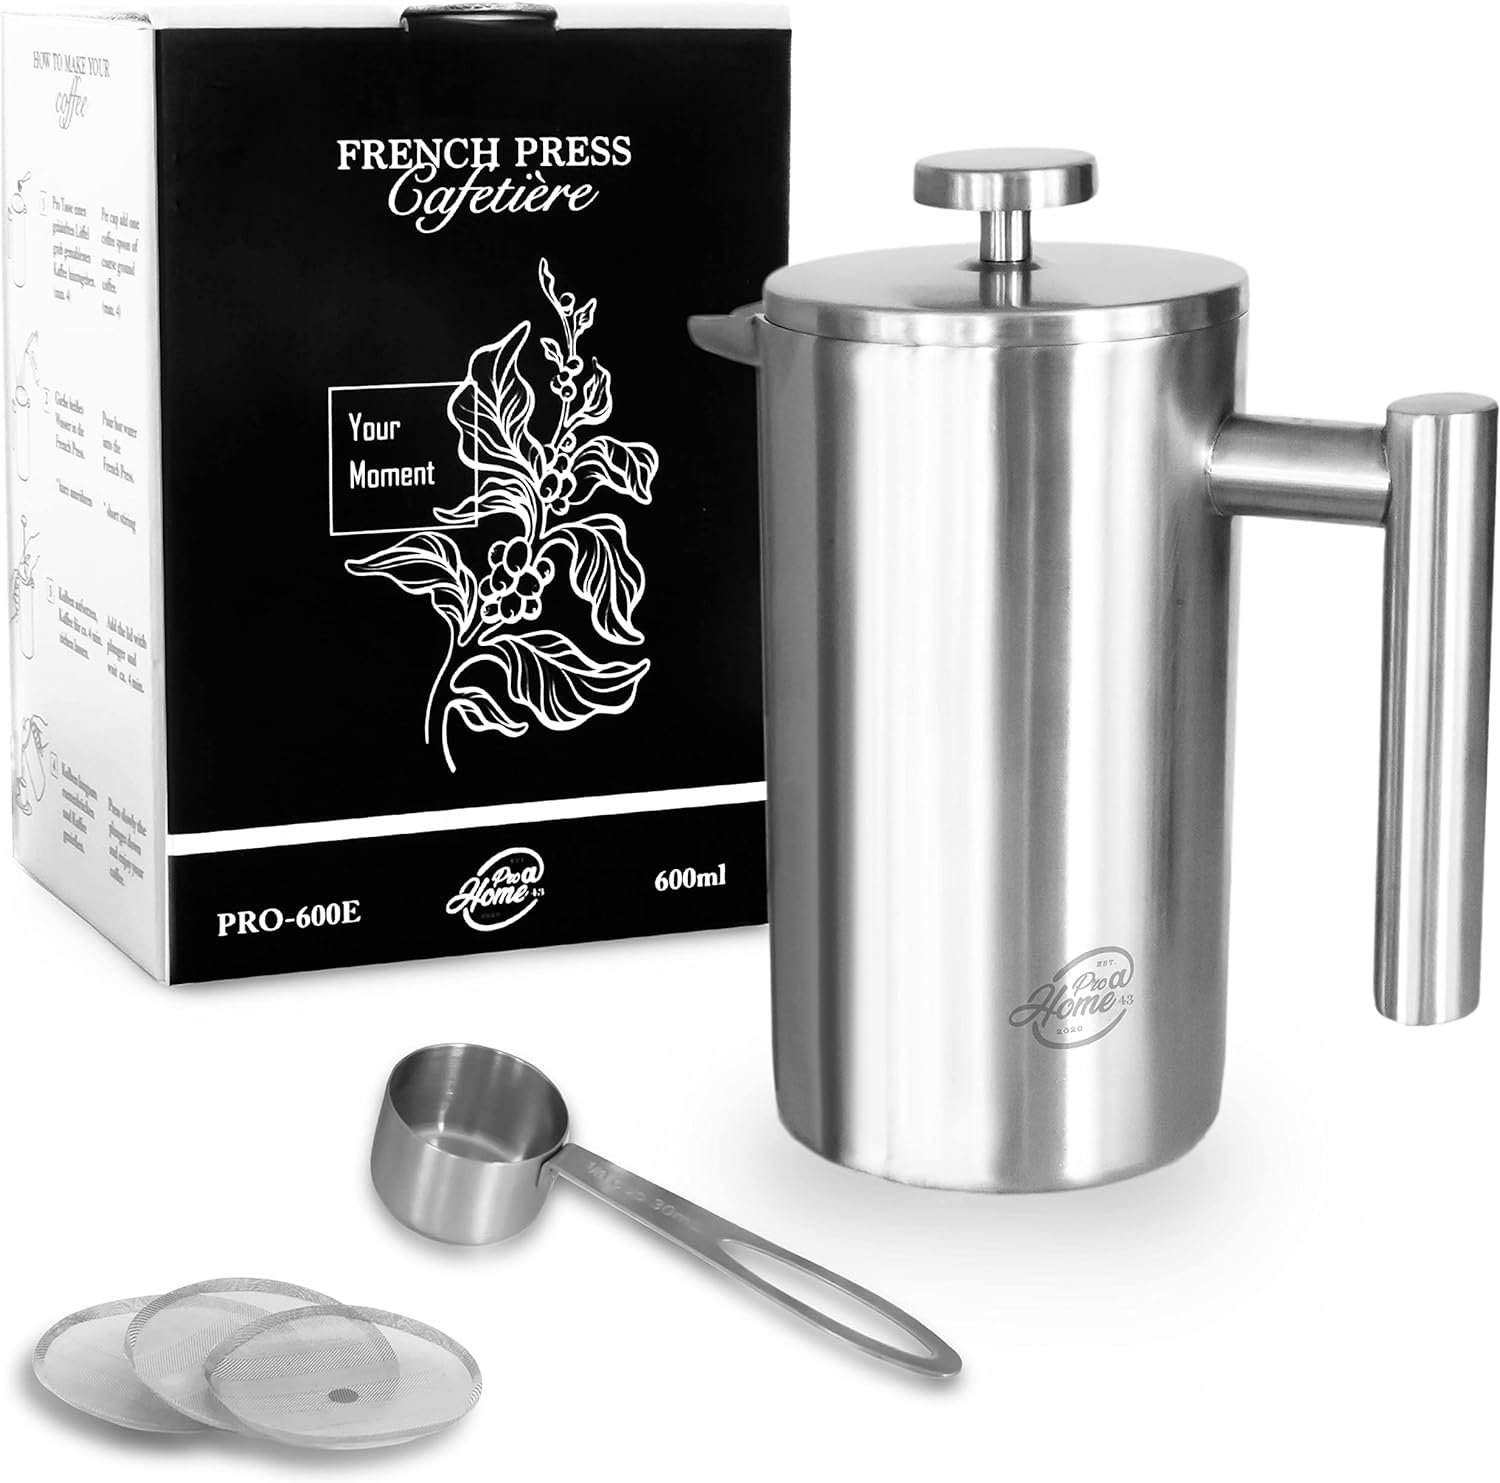 Pro@Home43® French Press Stainless Steel 0.6 L (4 Cups) Thermal Coffee Maker Outdoor Coffee Press Coffee Maker Camping Coffee Press with Stainless Steel Dosing Spoon / 3x Replacement Filters in Gift